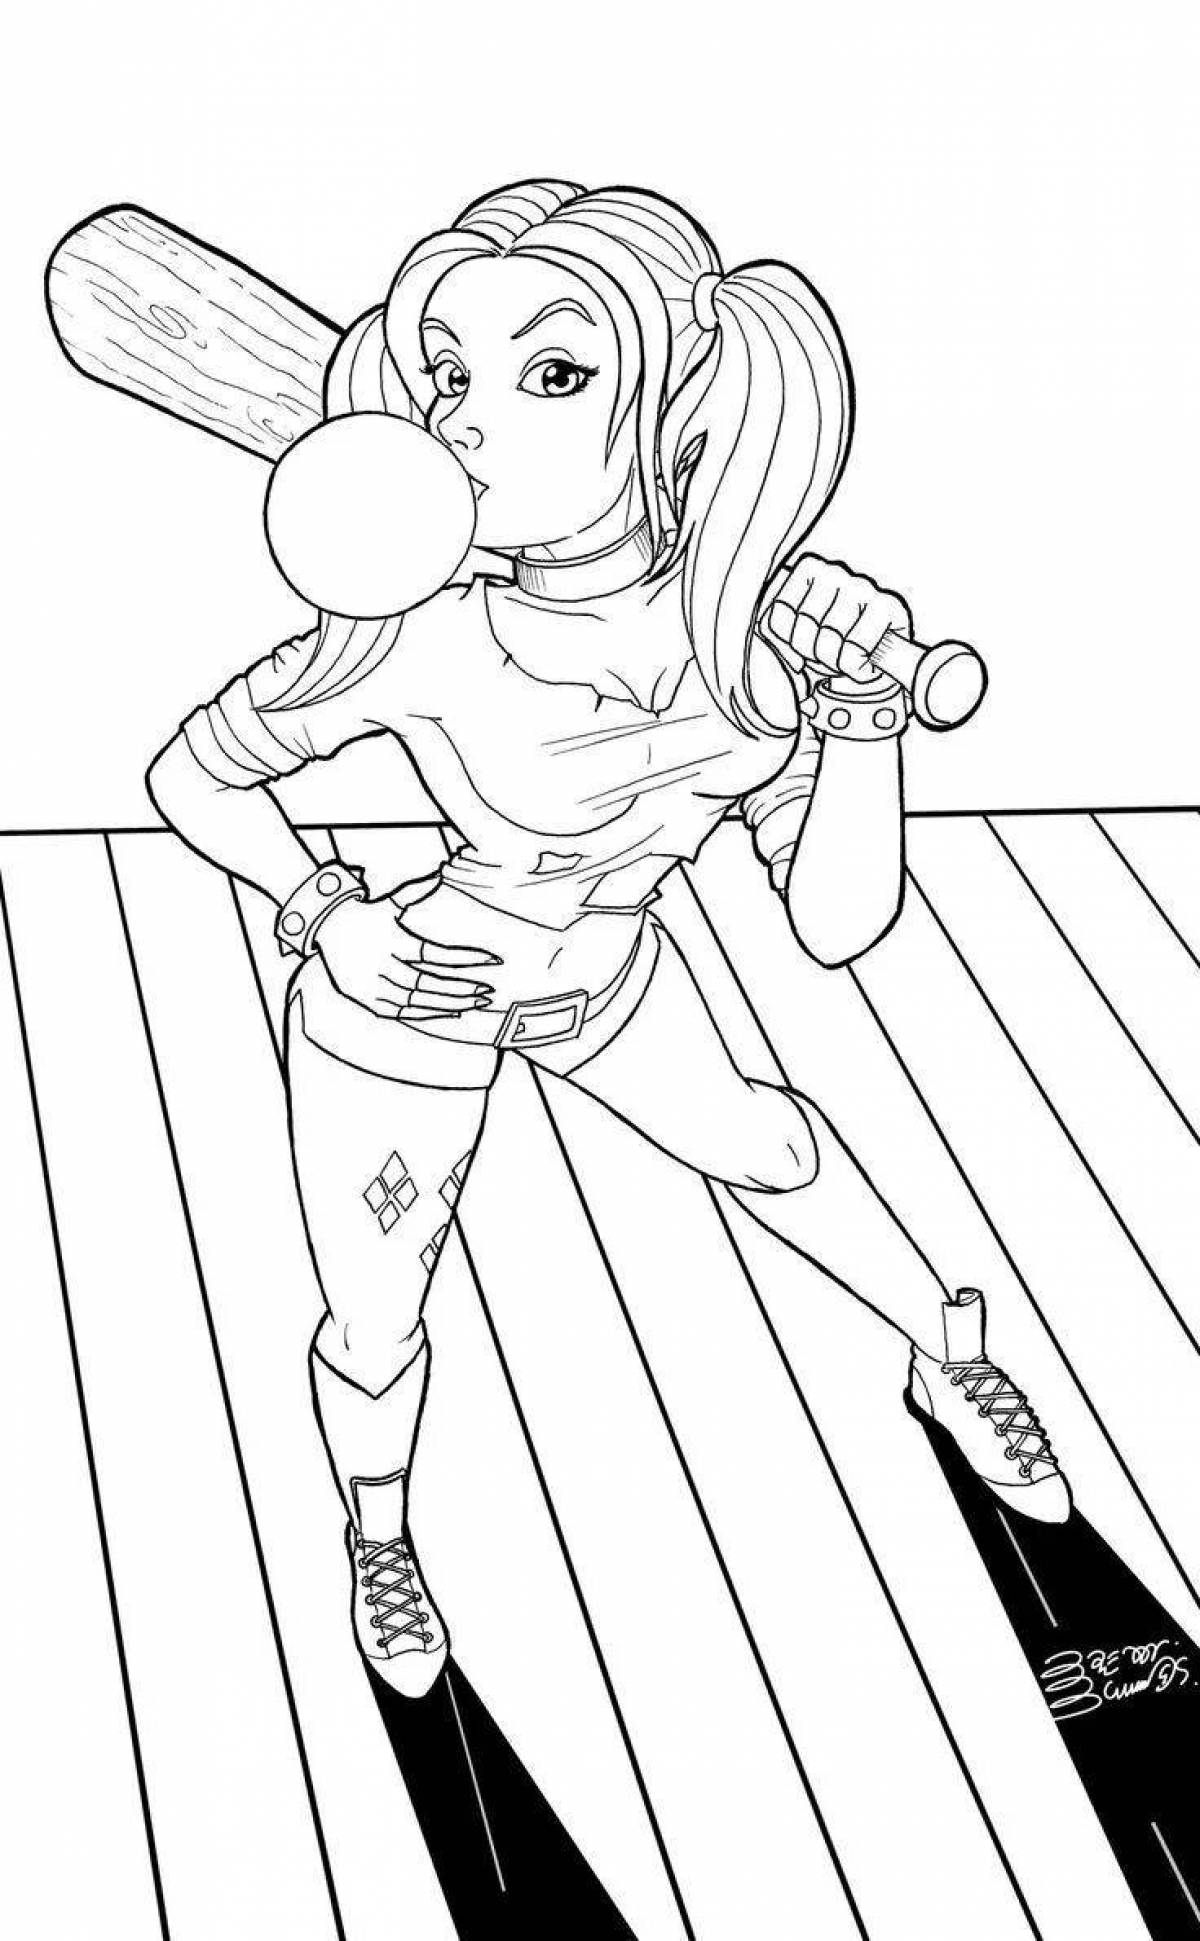 Mysterious coloring page 18 vulgar on android